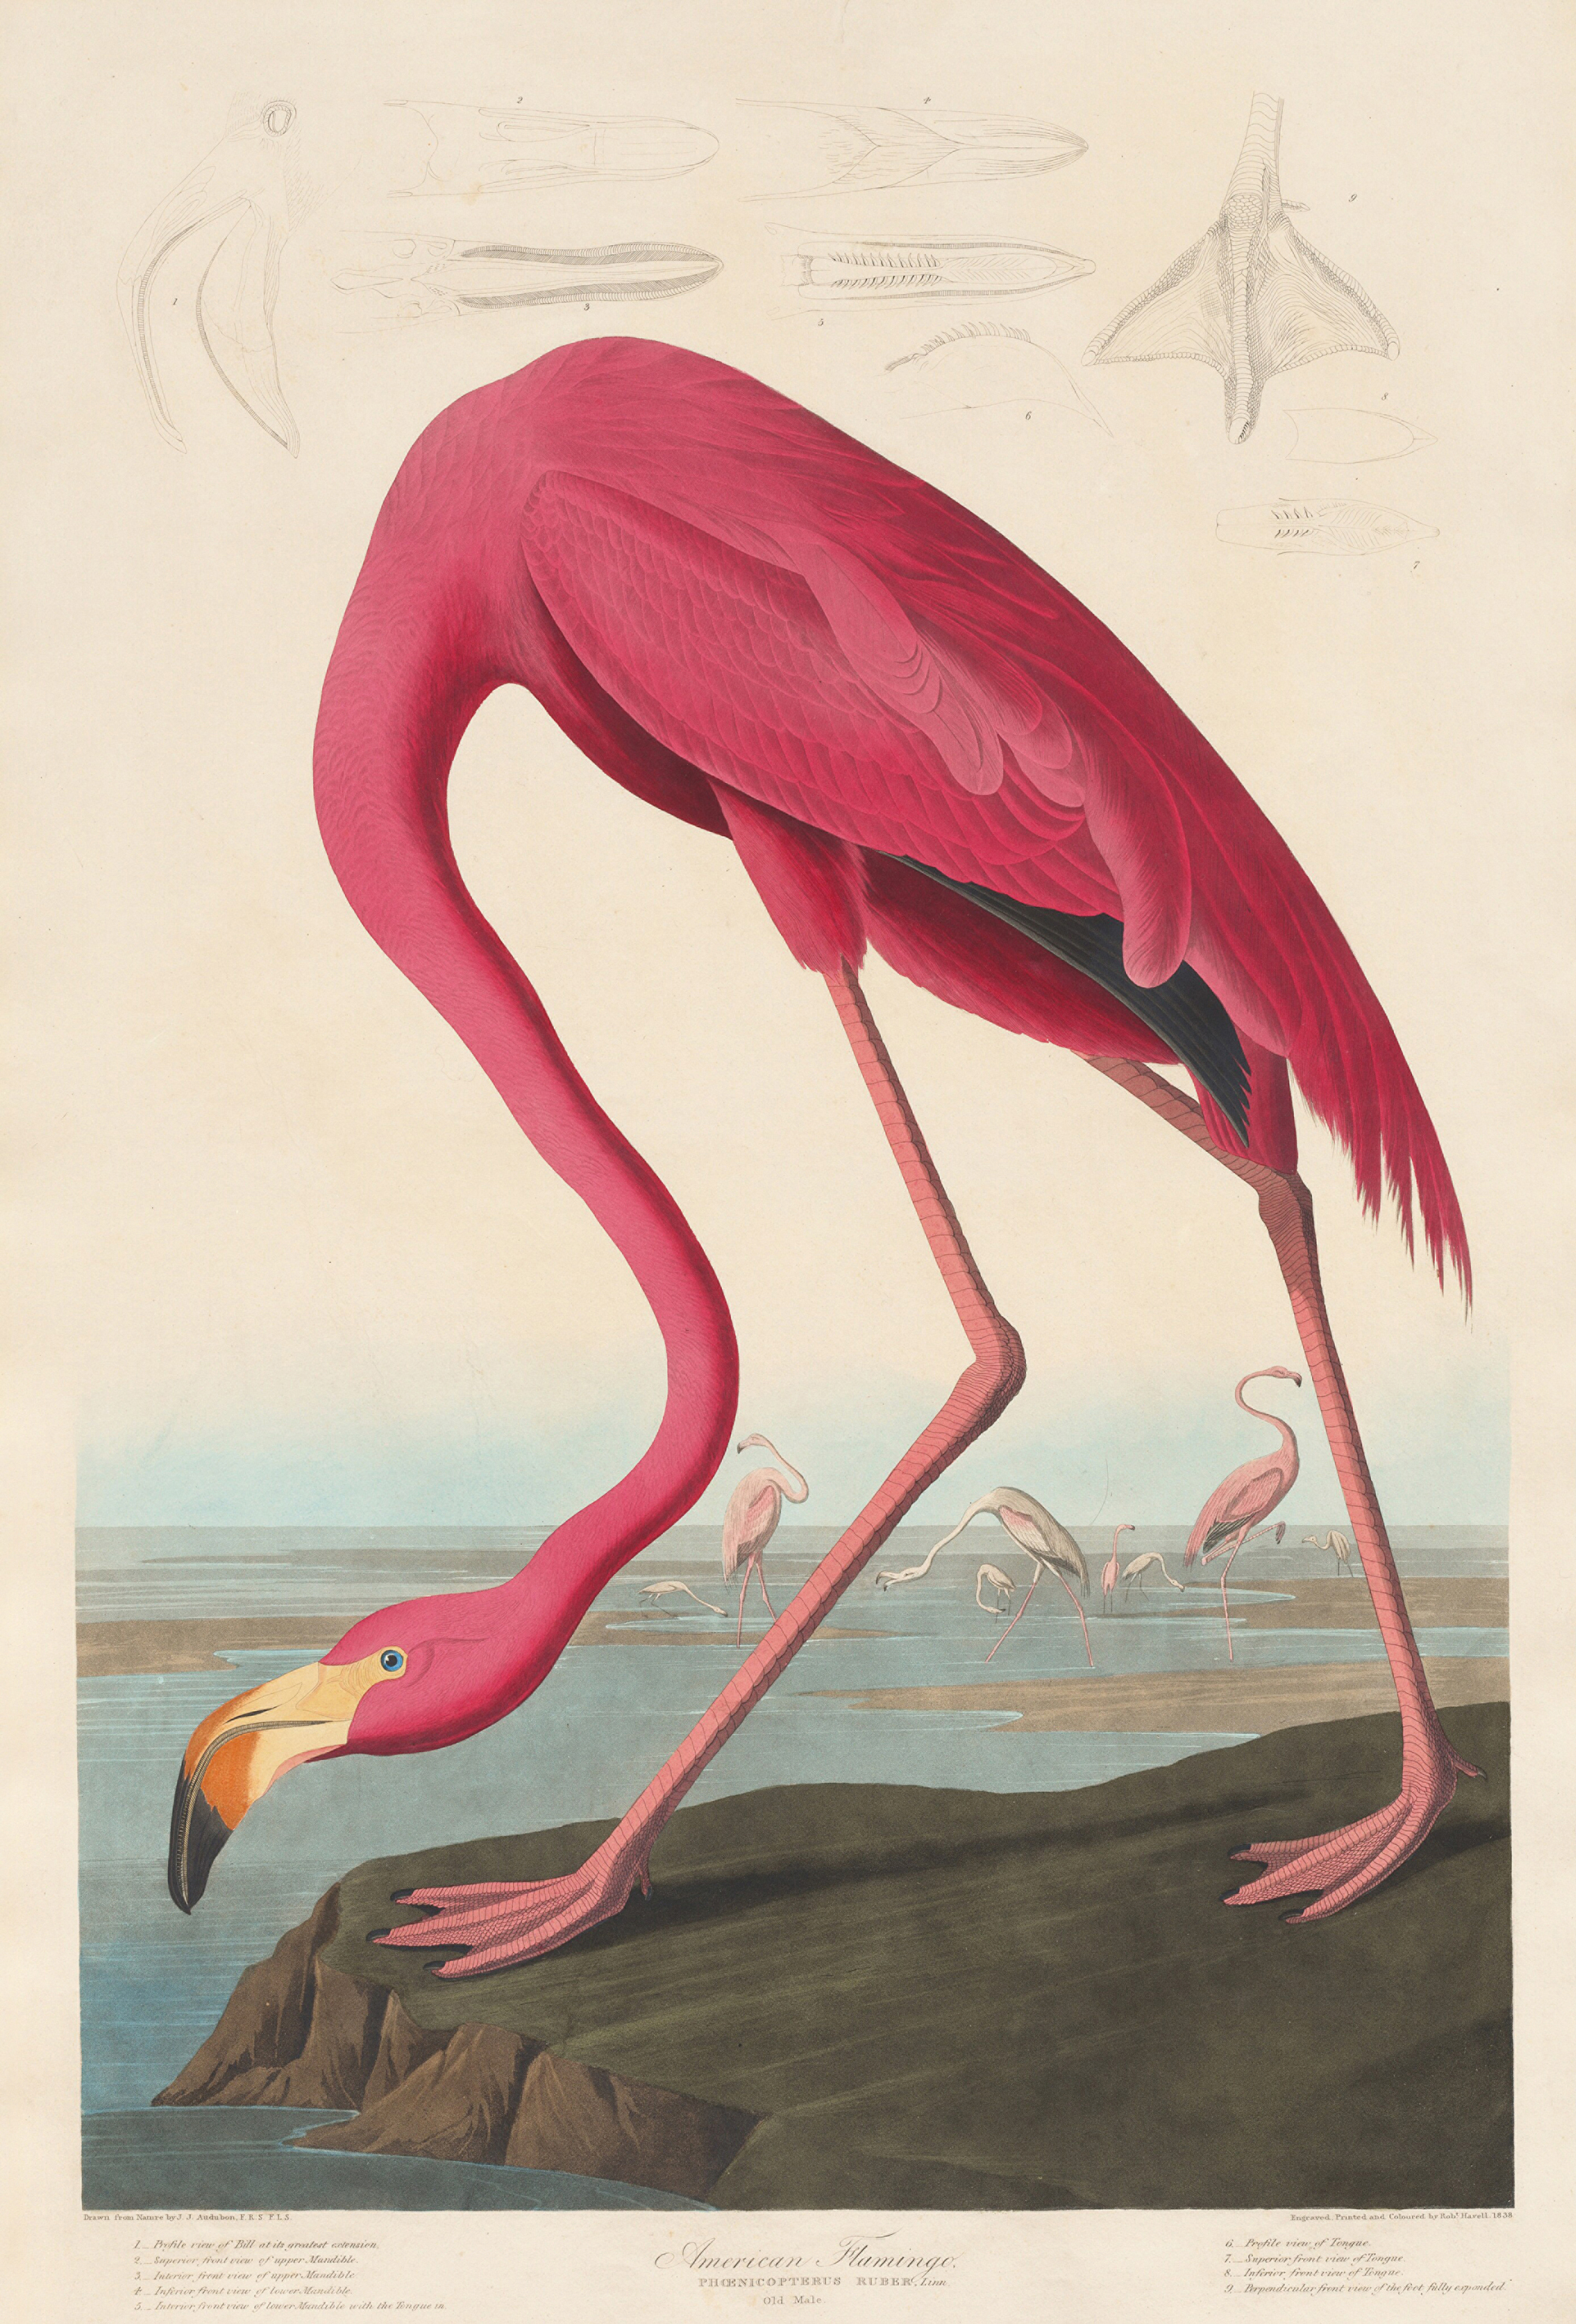 John James Audubon (engraved by Robert Havell), American Flamingo, from The Birds of America, double elephant folio edition, 1838